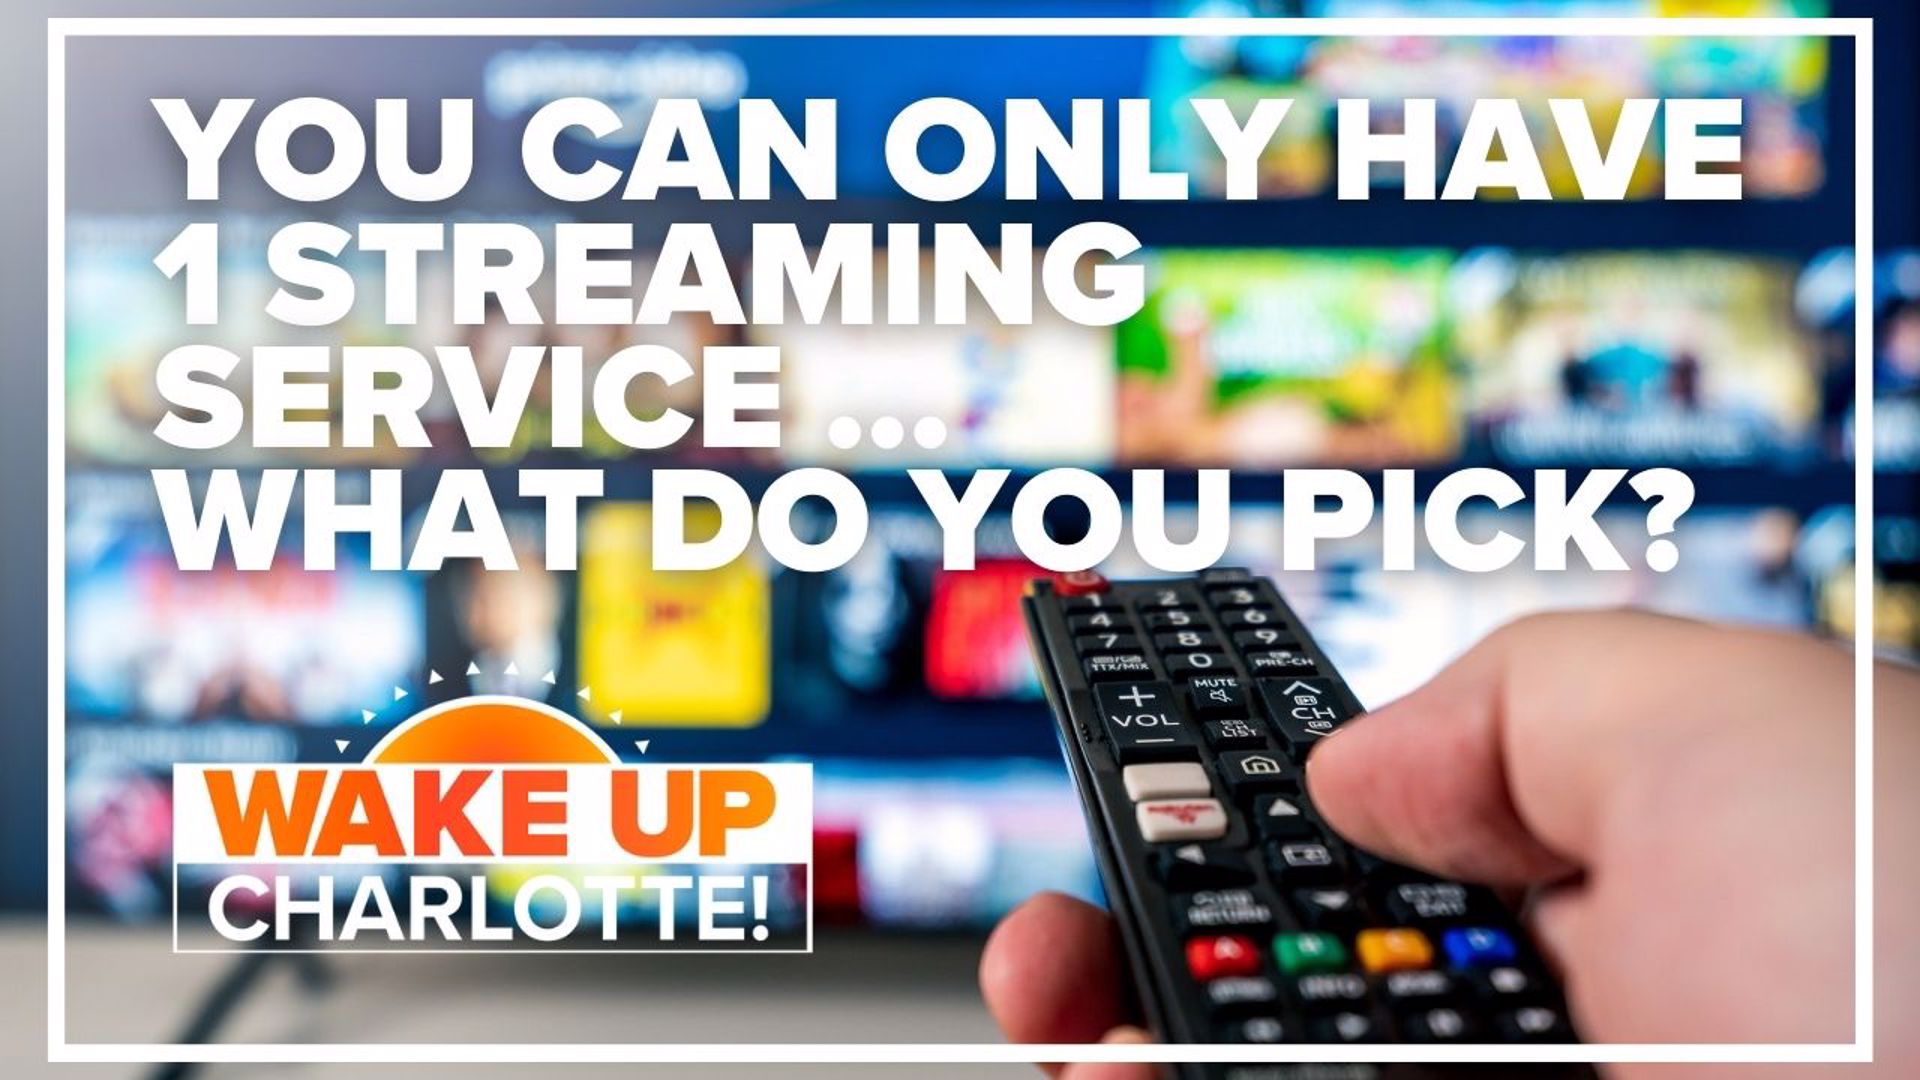 Netflix, HBO Max, Hulu, and more. The options for streaming are endless. But what if you could only have one service? Which one would you pick?